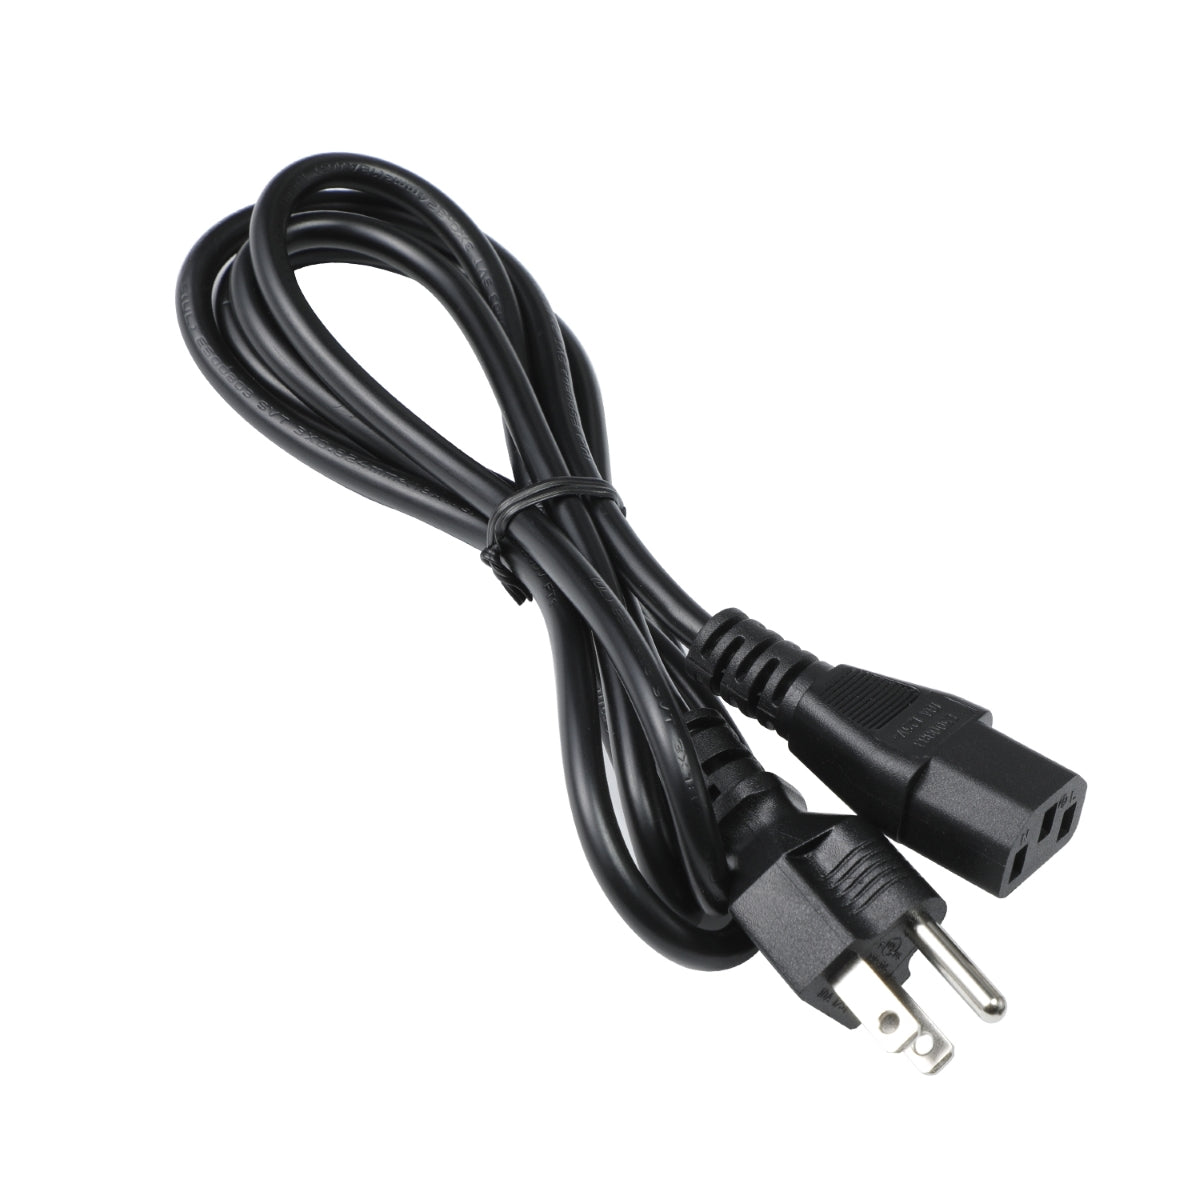 Power Cord for Acer CB241H Monitor.